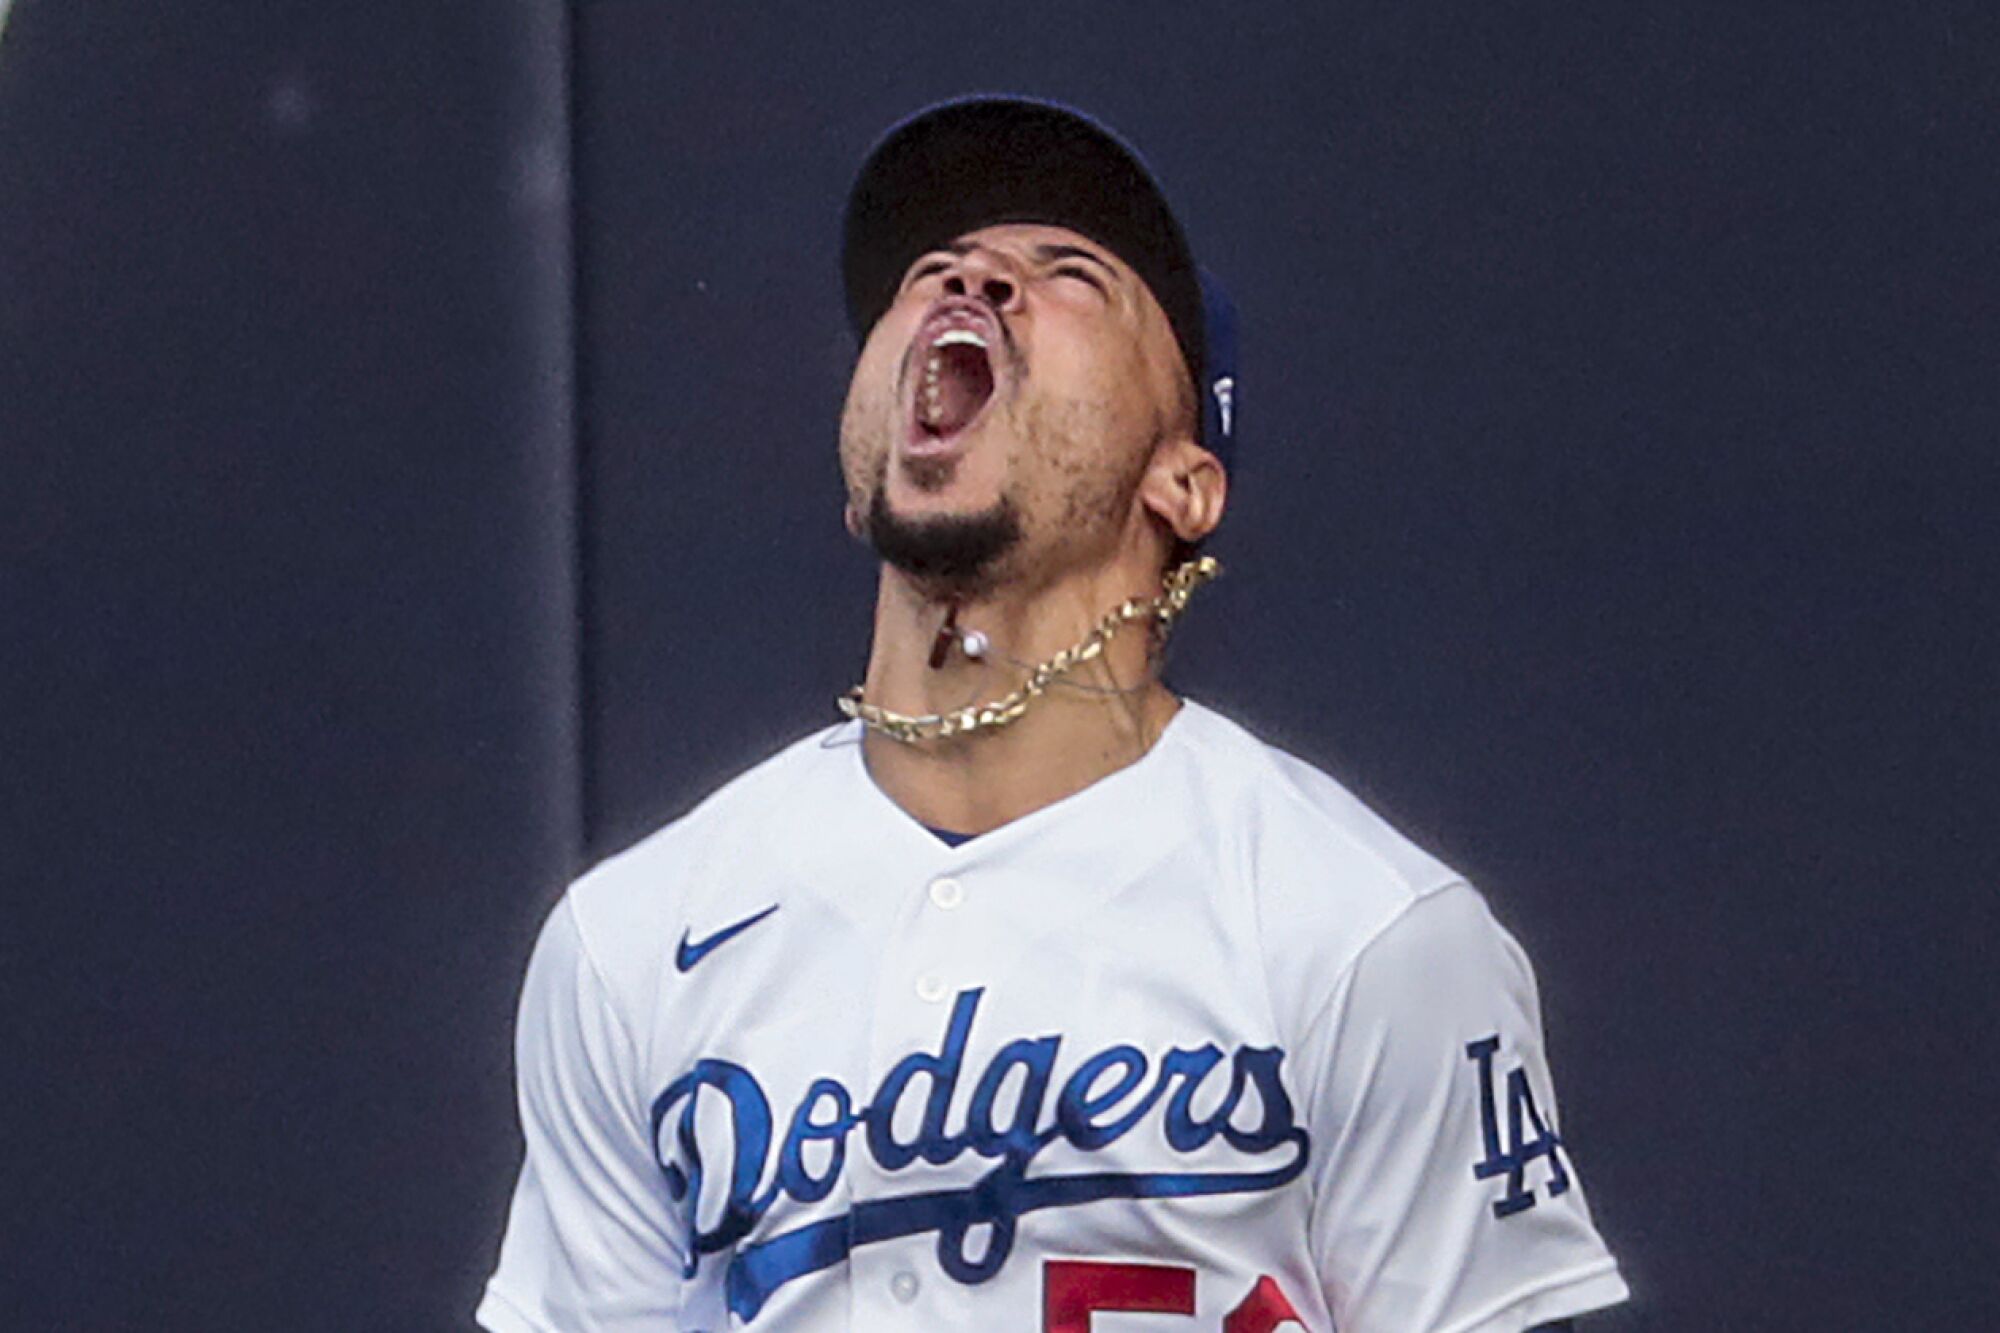 Dodgers right fielder Mookie Betts celebrates after makes a leaping catch on a ball hit by Atlanta's Marcell Ozuna.